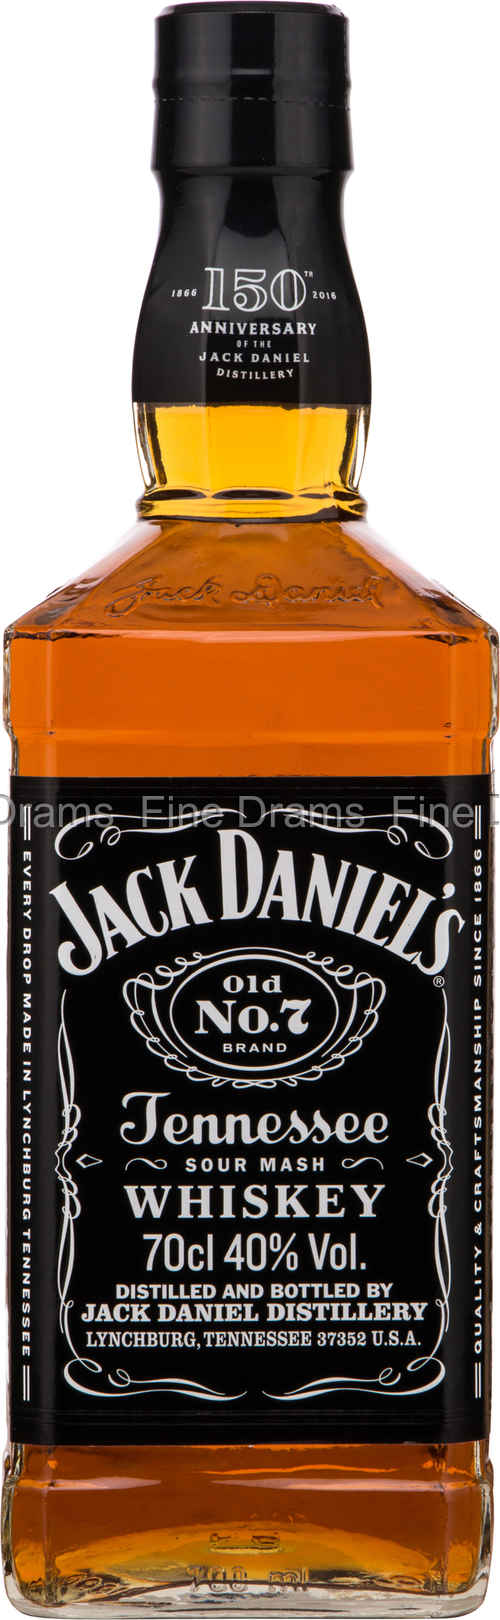 No.7 Tennessee Whisky Daniel\'s Old Jack